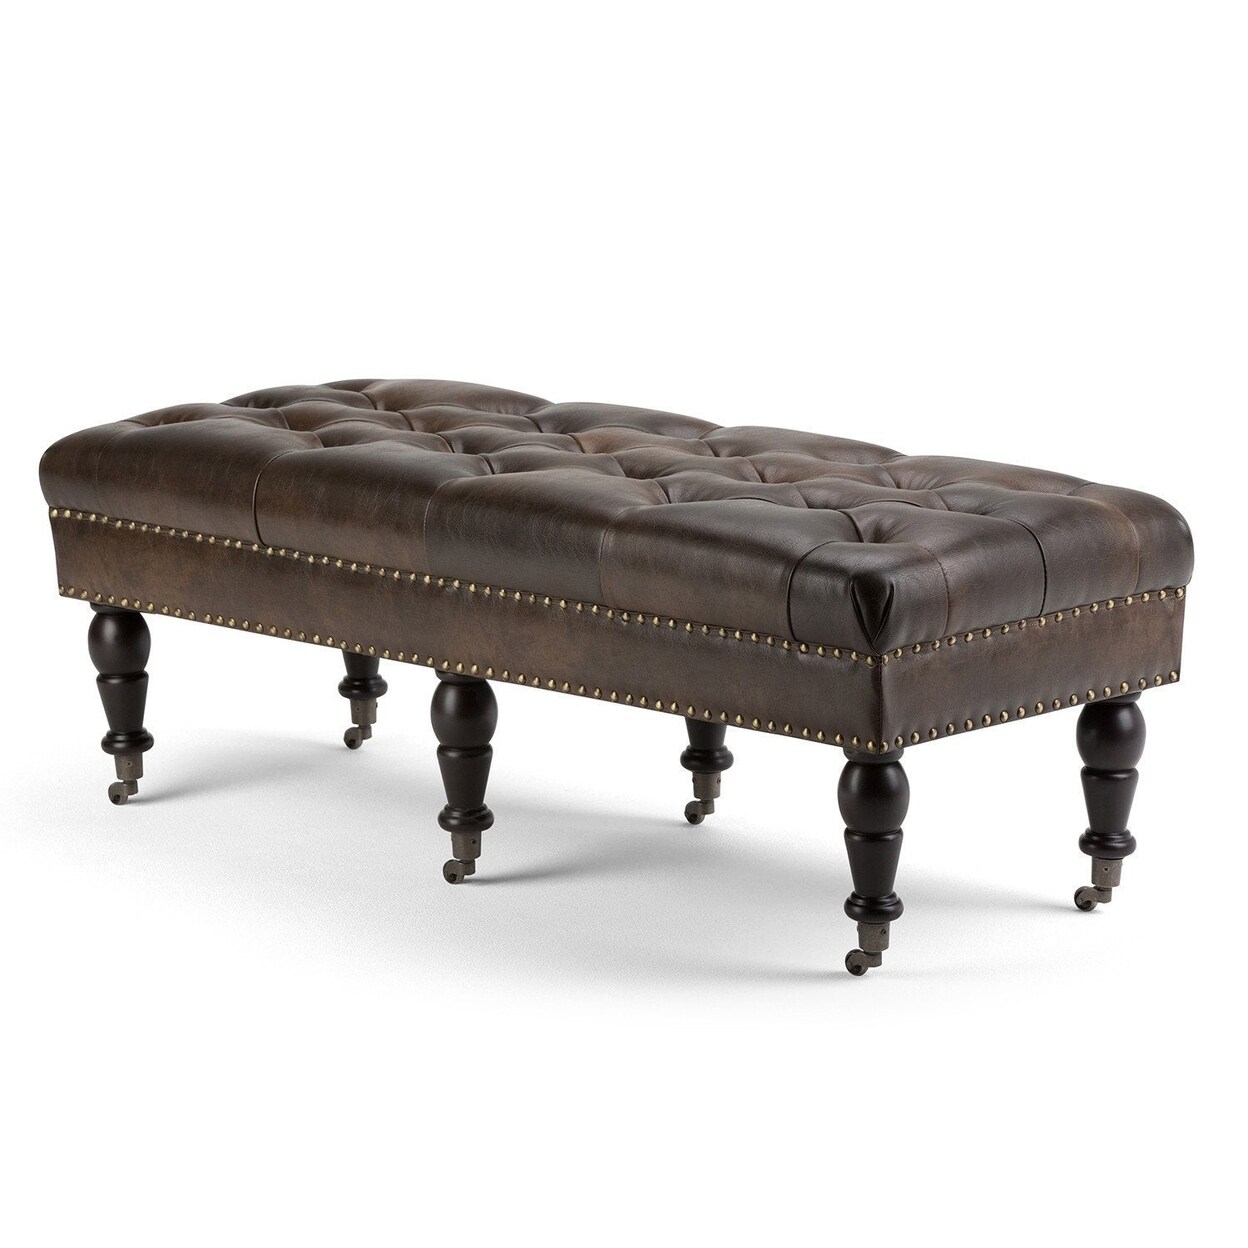 Simpli Home Henley Ottoman Bench in Distressed Vegan Leather